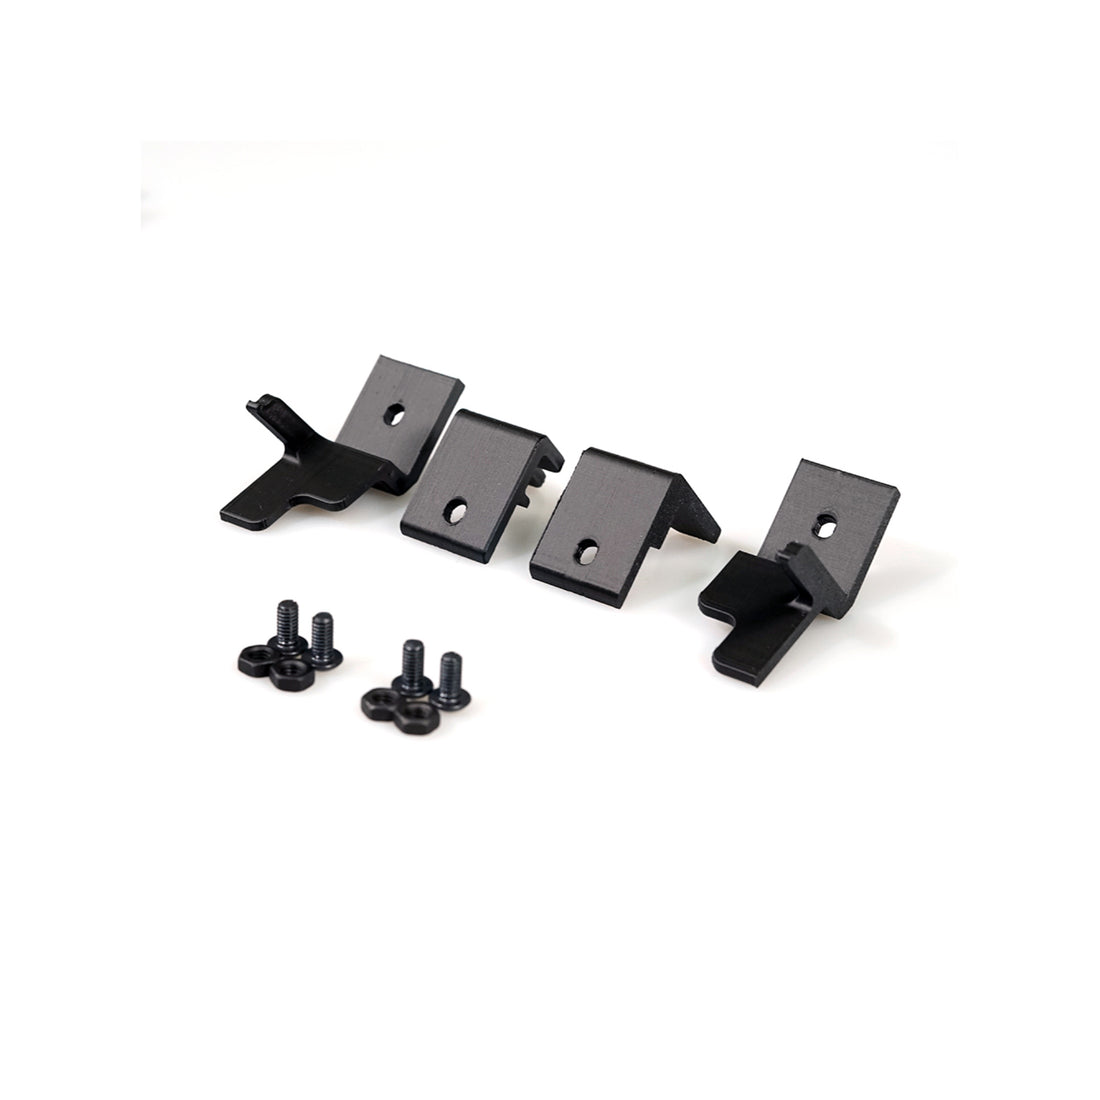 Retaining Clips for PK1 Extreme Stand for ATEM Mini Extreme